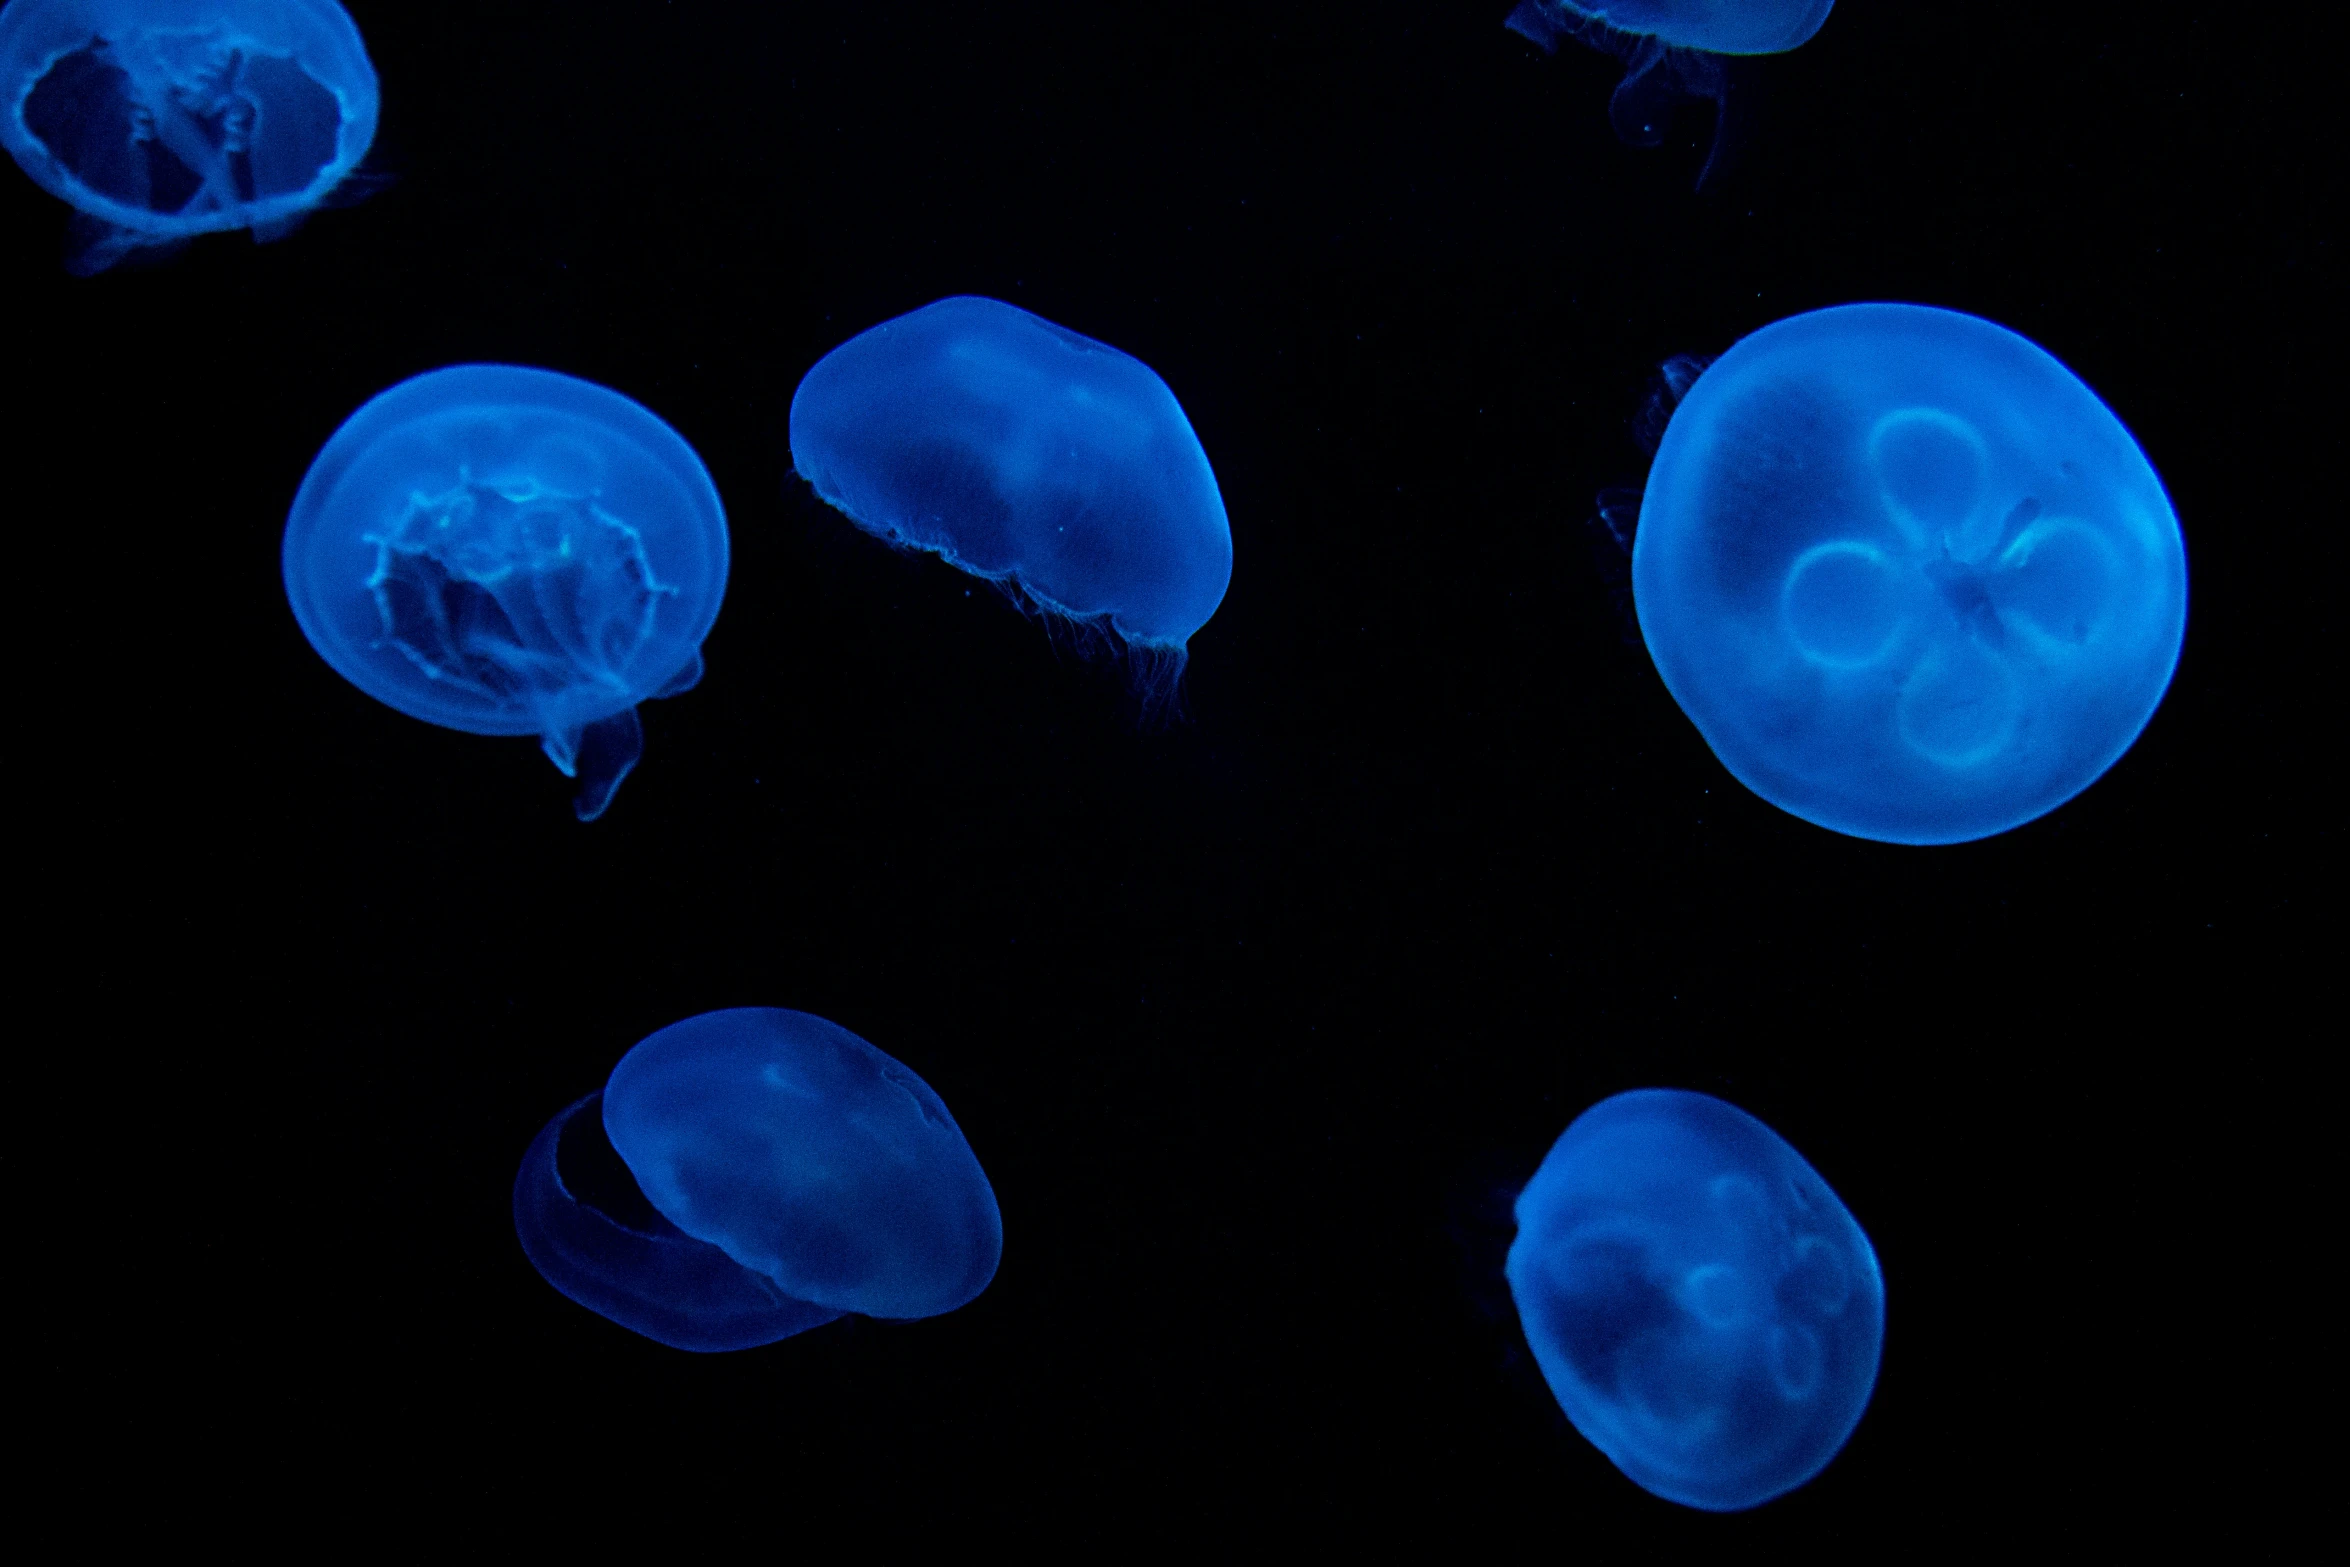 a set of four jelly fish floating in the water